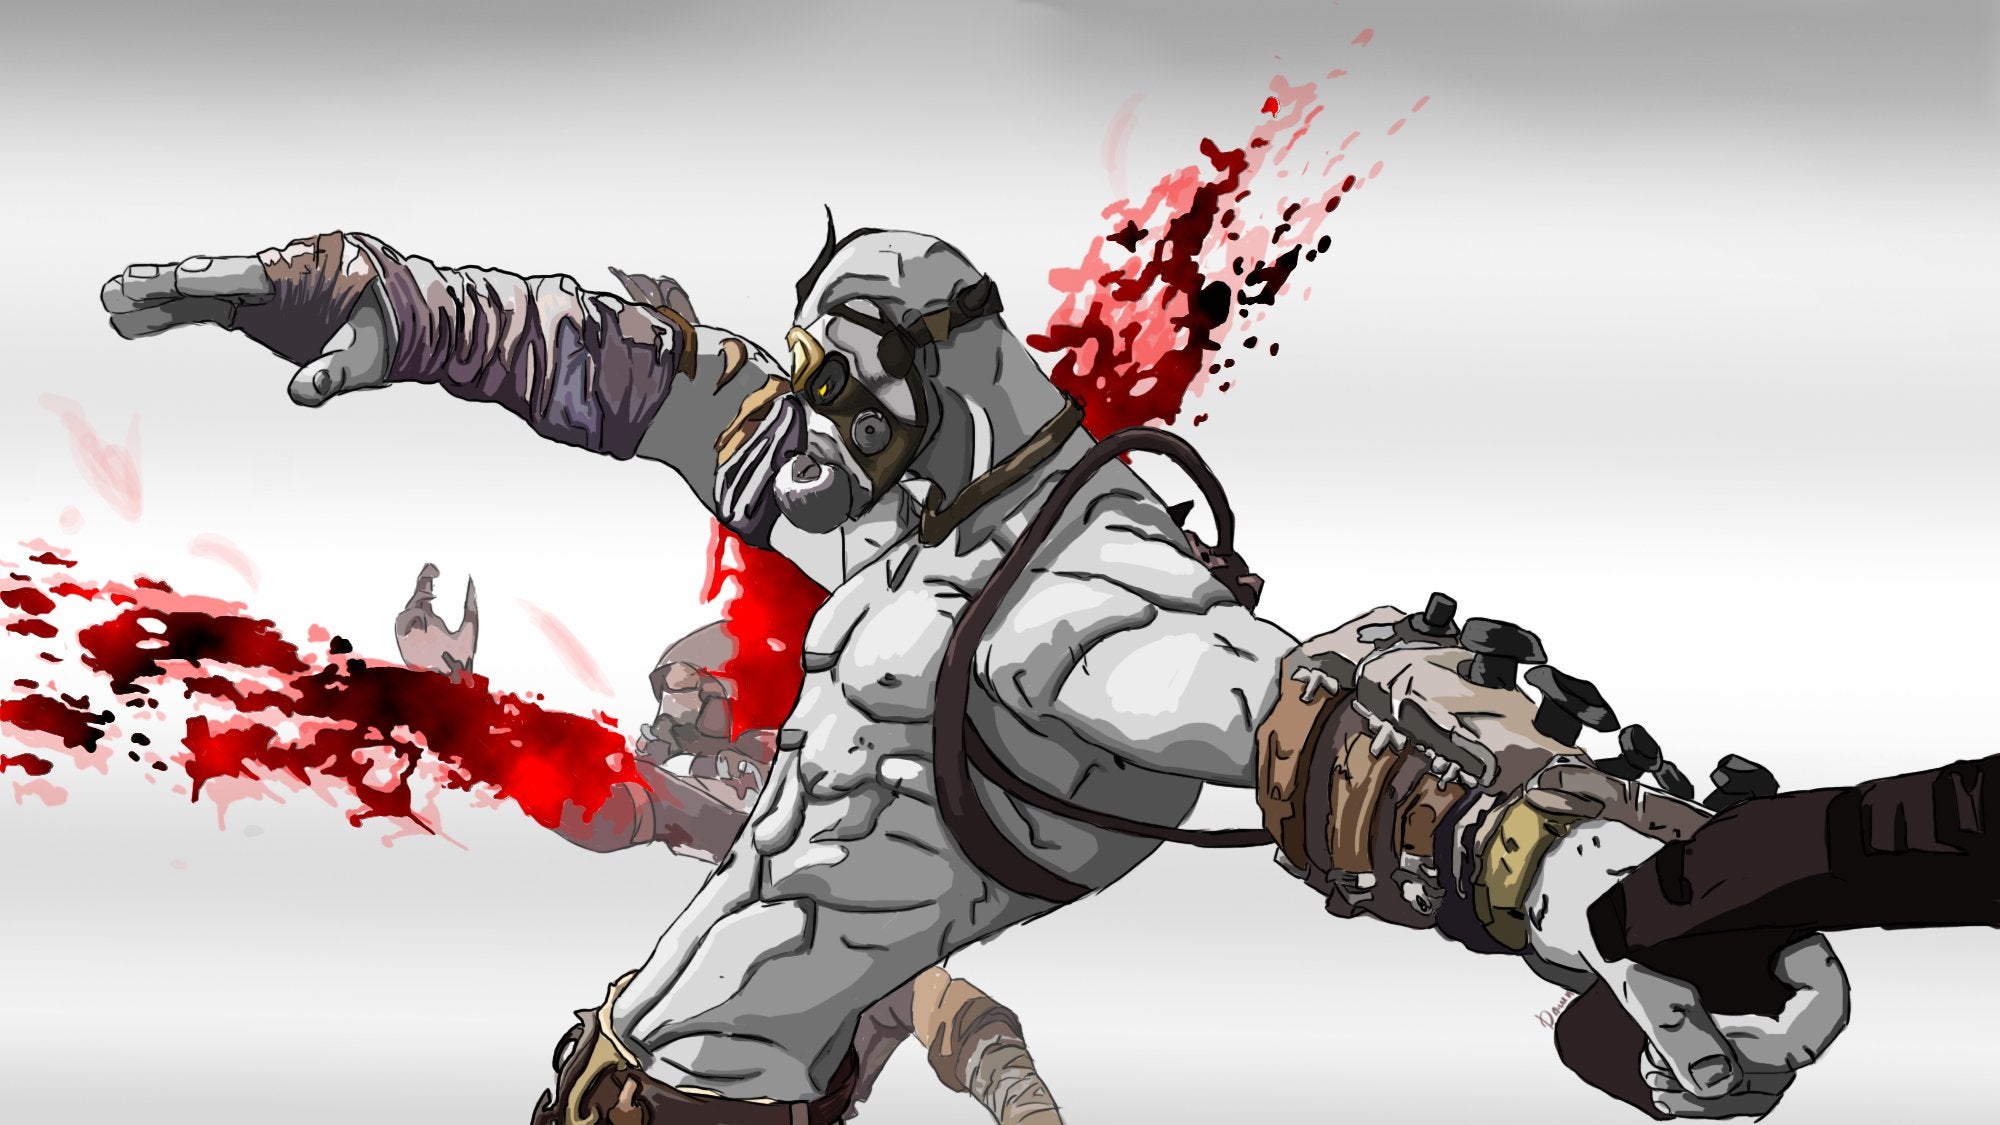 This is my desktop wallpaper im a big fan of borderland you can use it if you wish rborderlands